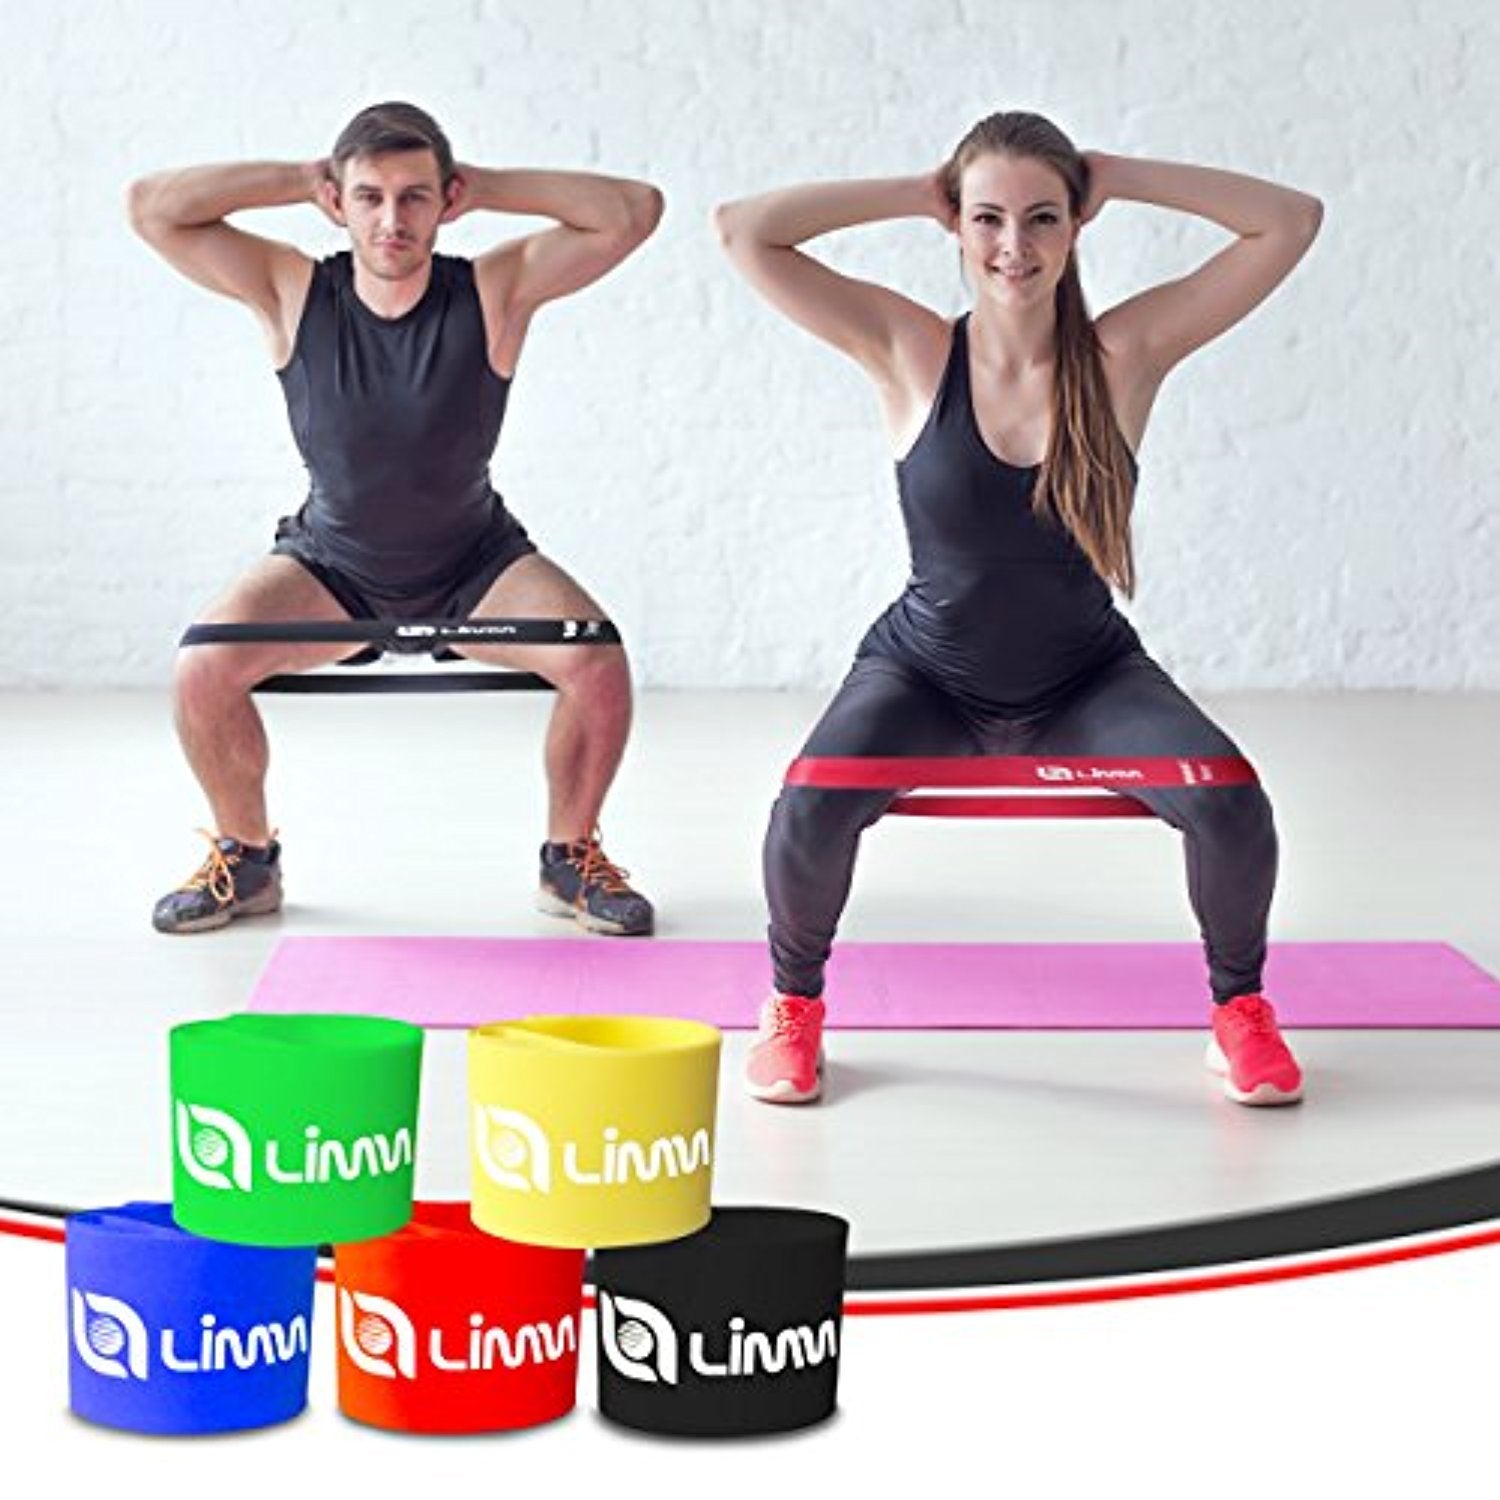 Resistance Loop Band Exercise Set, Guide, Bag, and Video